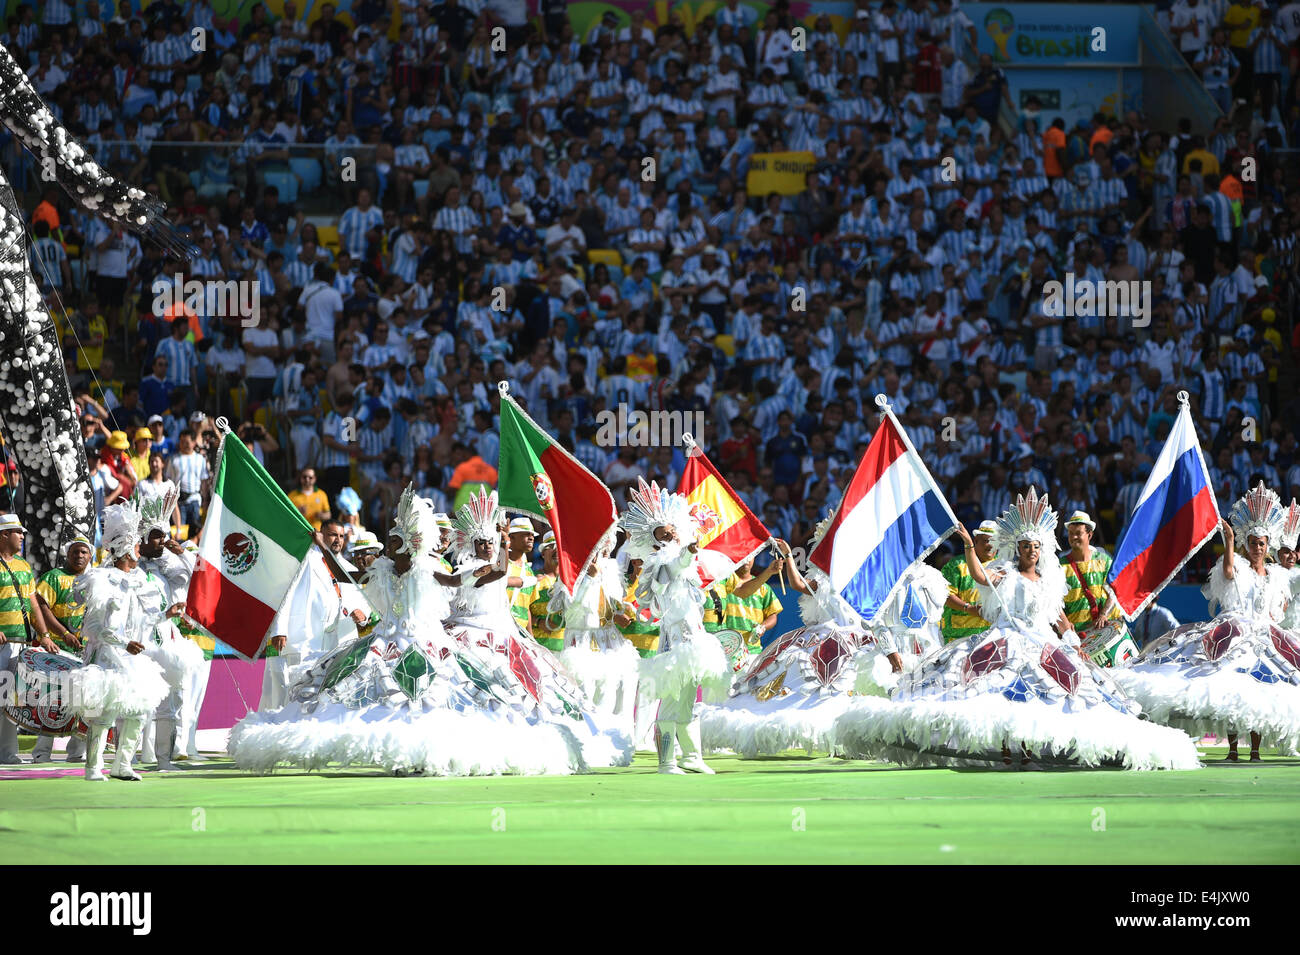 Rio De Janeiro, Brazil. 13th July, 2014. Performers carry national flags of countries during the closing ceremony before the final match between Germany and Argentina of 2014 FIFA World Cup at the Estadio do Maracana Stadium in Rio de Janeiro, Brazil, on July 13, 2014. Credit:  Liu Dawei/Xinhua/Alamy Live News Stock Photo